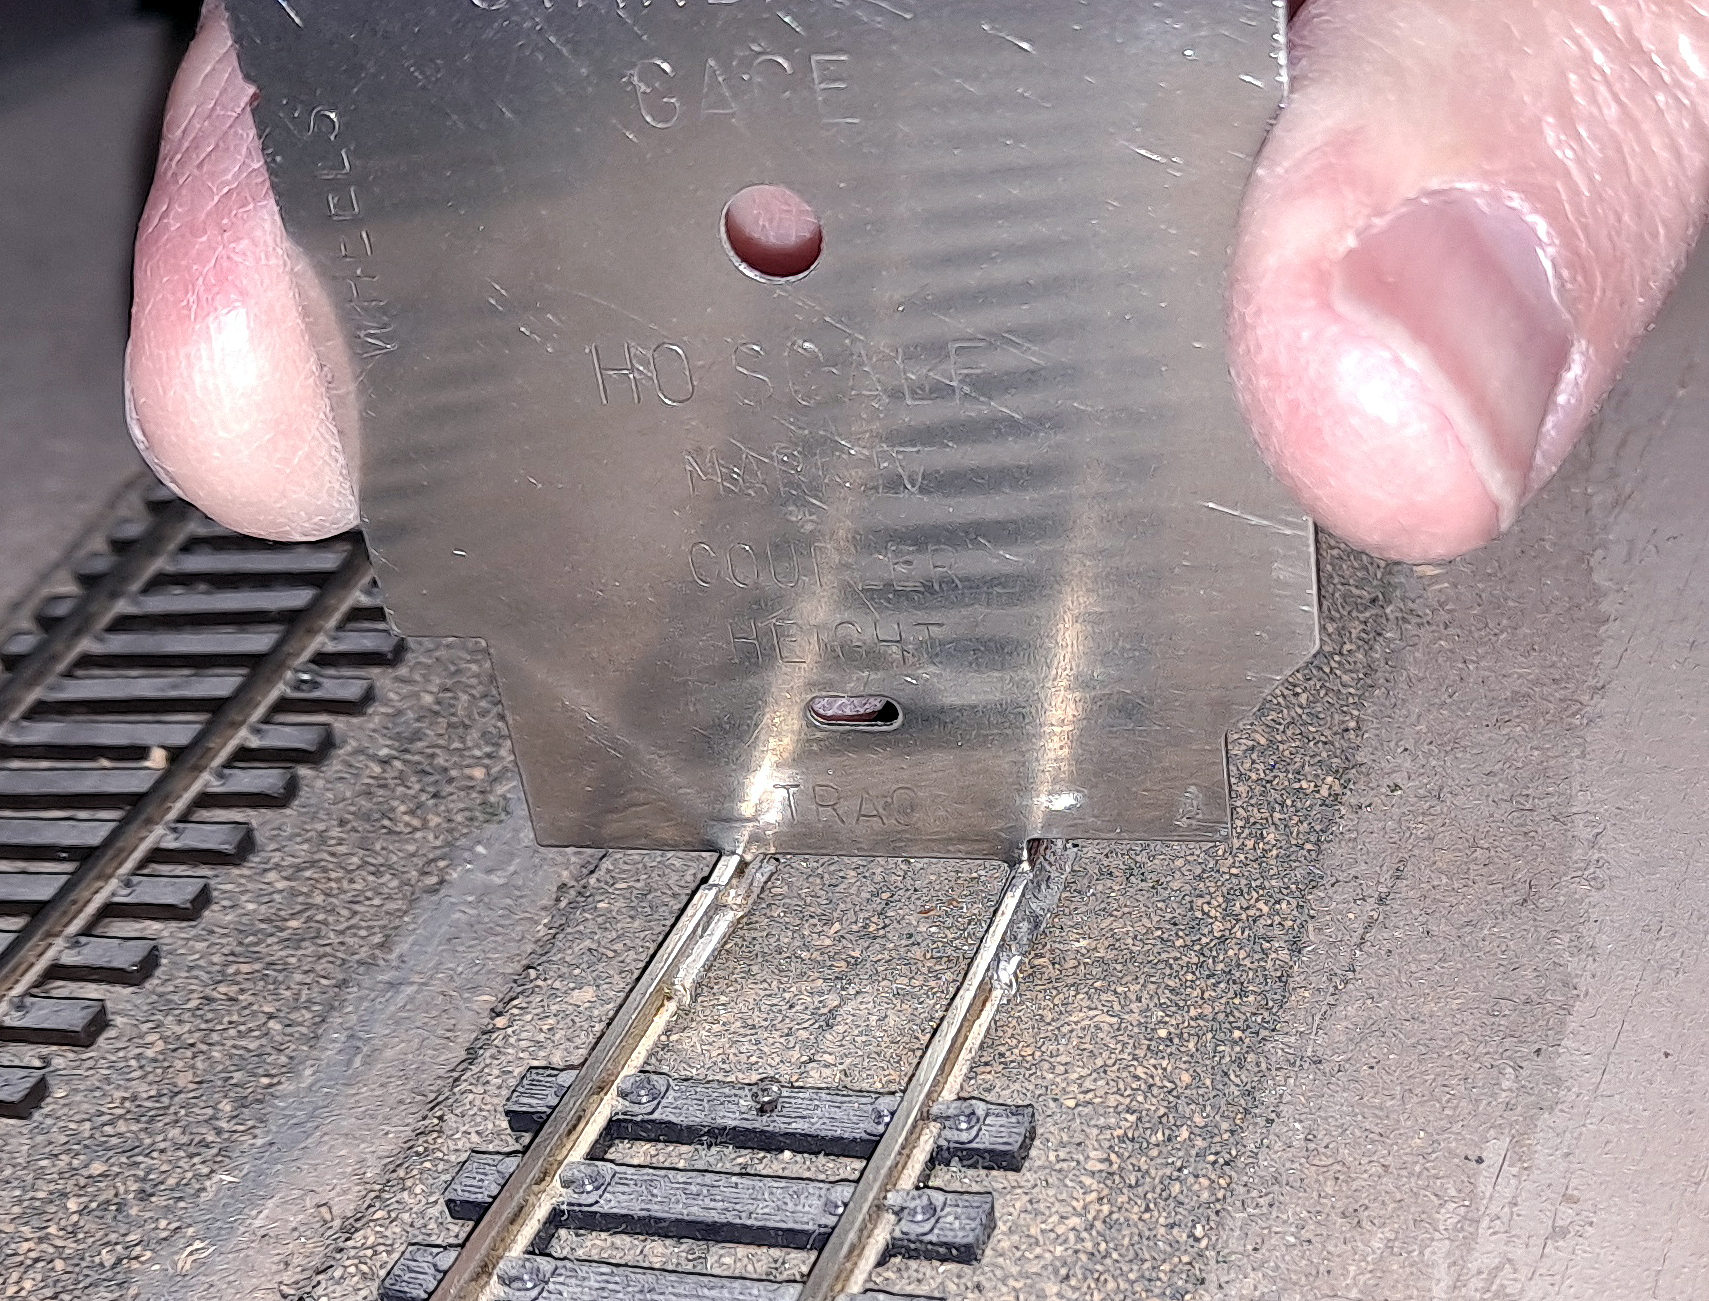 How to use PCB ties: A National Model Railroad Association standards gauge is placed on the track.